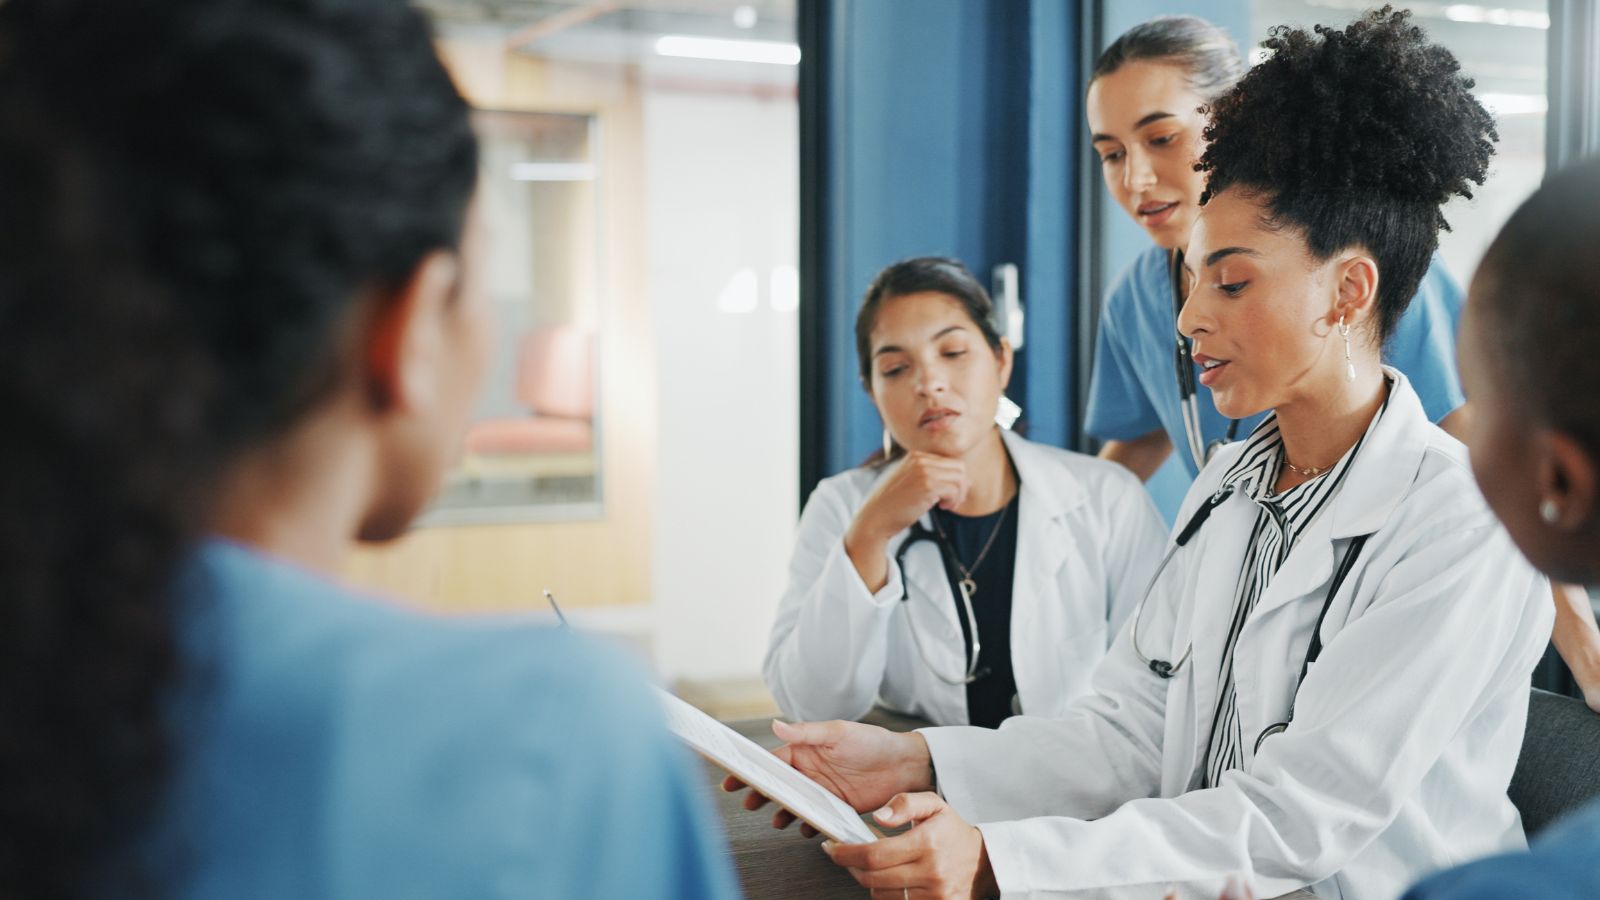 <p>Working alongside doctors, physician assistants provide medical care, conduct exams, and prescribe meds. They're a crucial part of healthcare, often earning high salaries thanks to their advanced training and important role. Plus, this career offers great job security and a deep sense of fulfillment.</p>